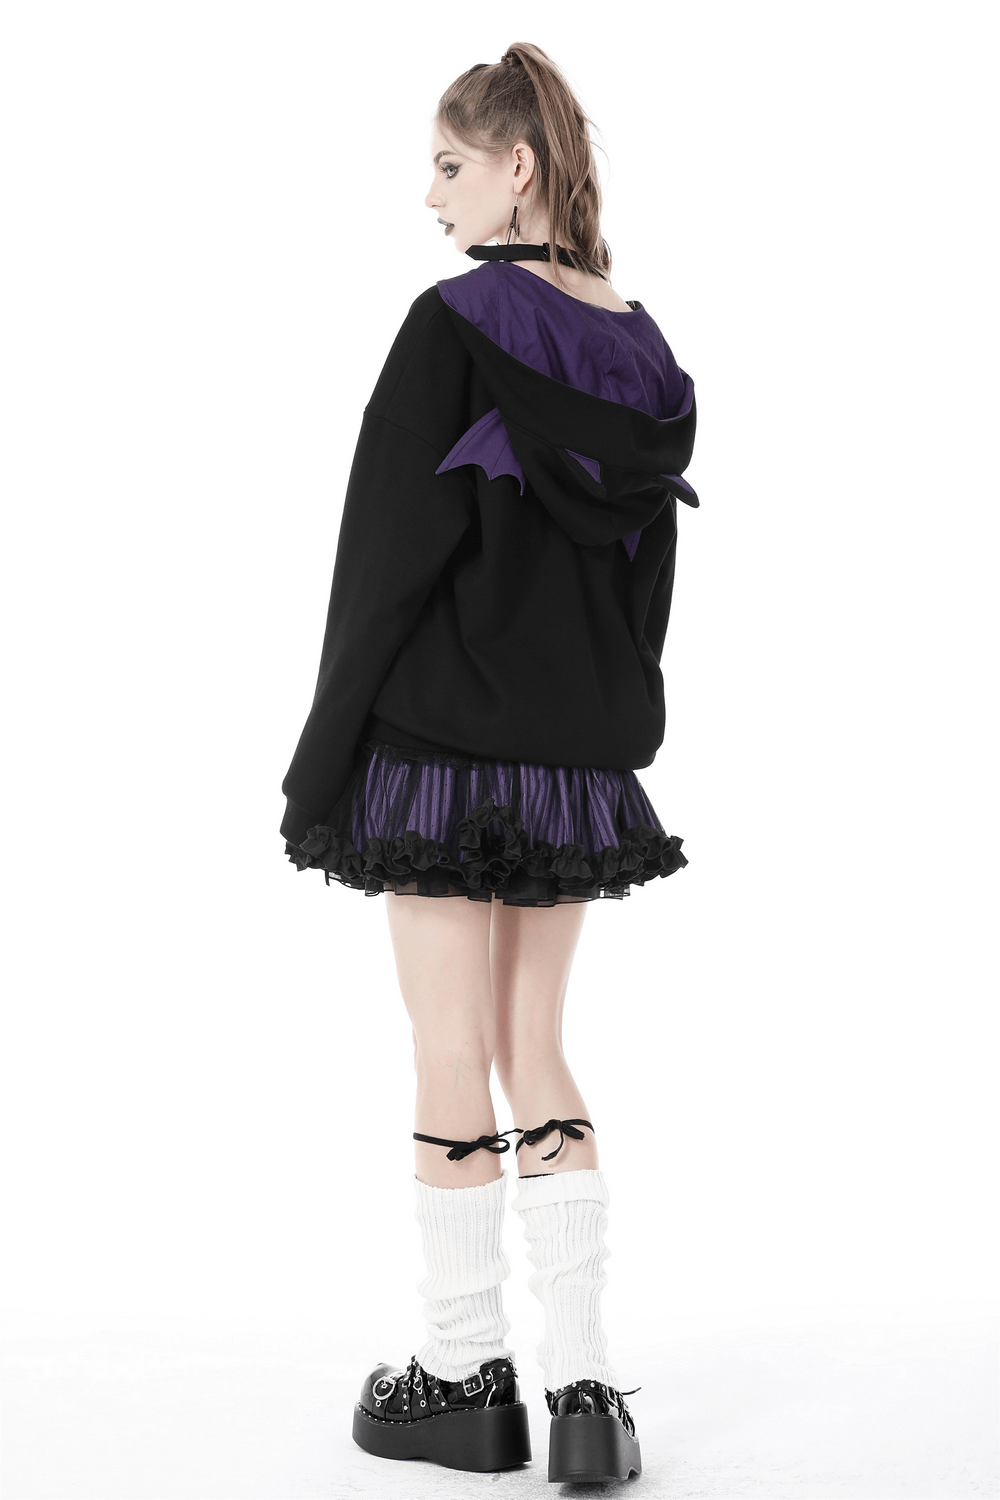 Black Bat Wing Cat Ear Hoodie with Lace-Up Detail